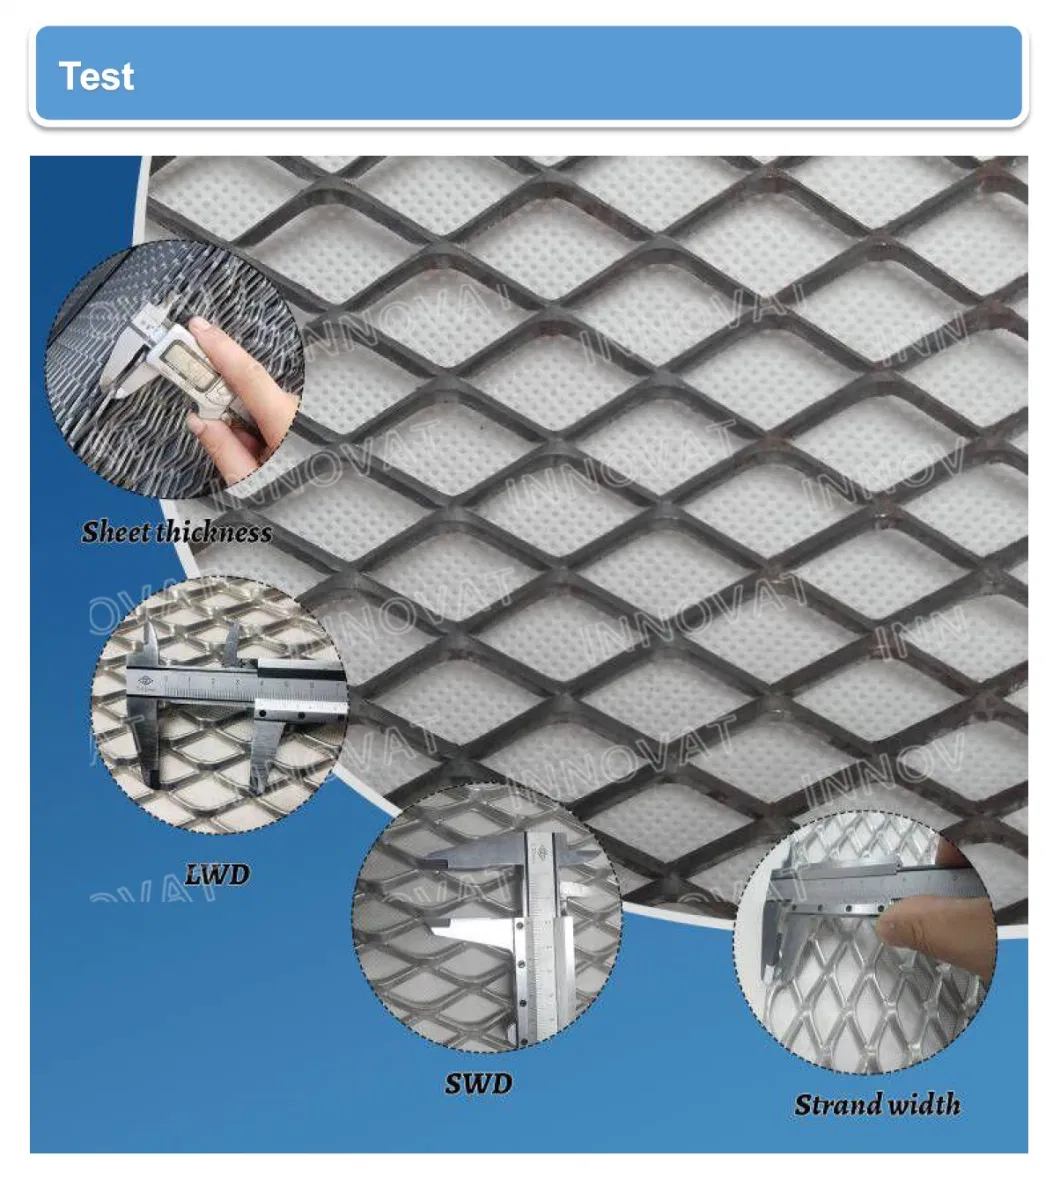 Galvanized Stainless Steel Aluminum Expanded Metal Mesh, Granary Network